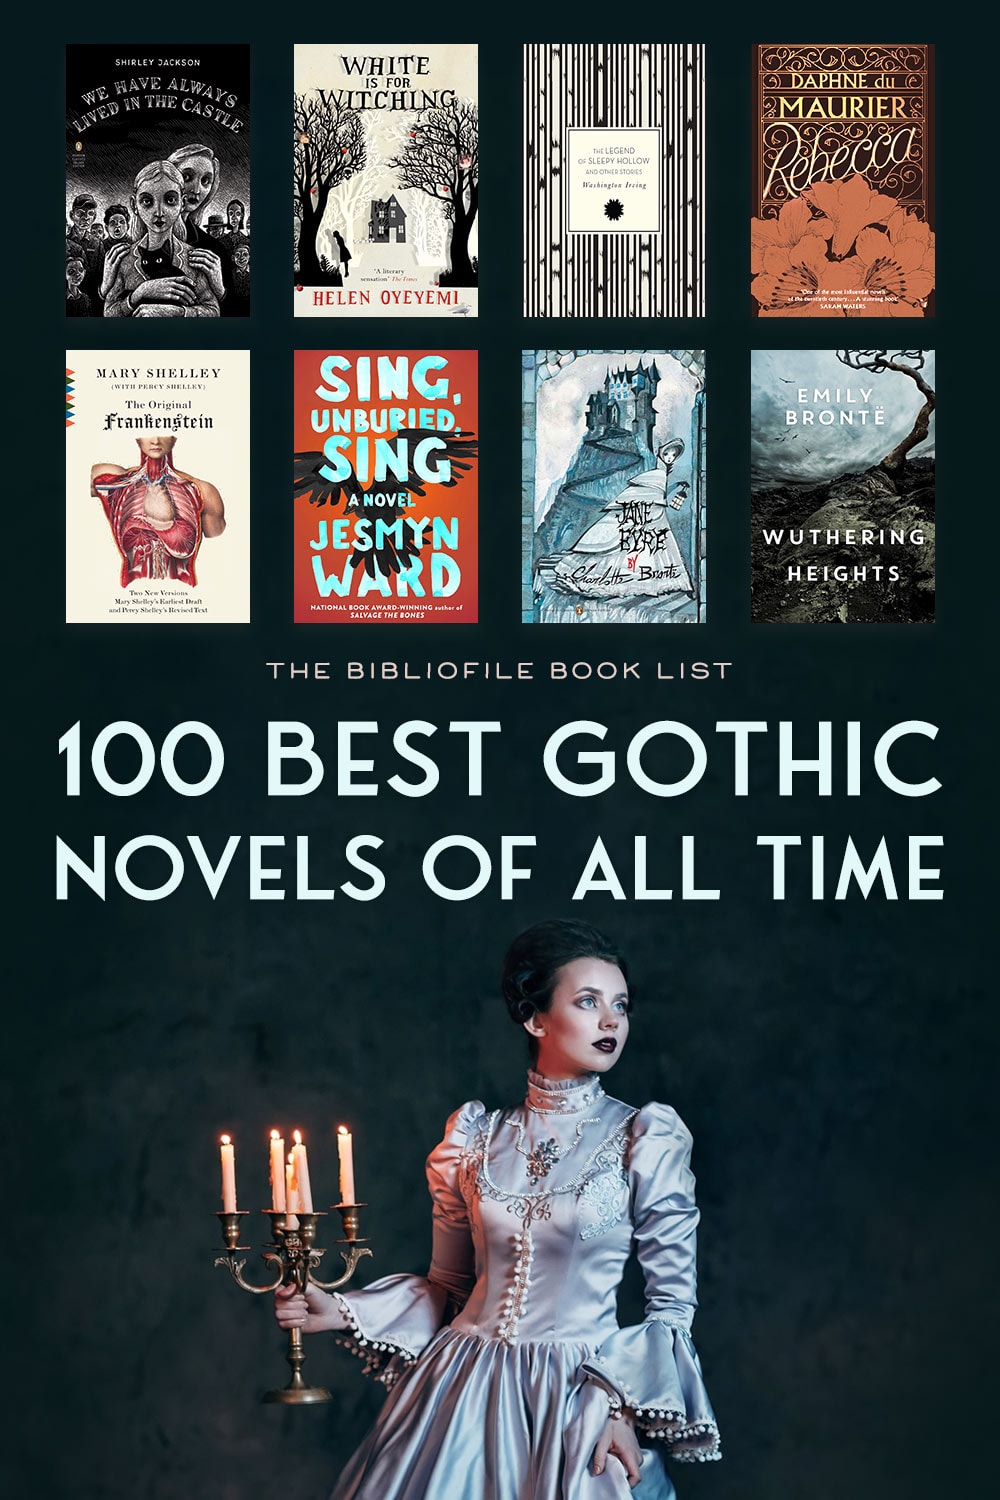 100 Best Gothic Books and Stories (of All Time) The Bibliofile